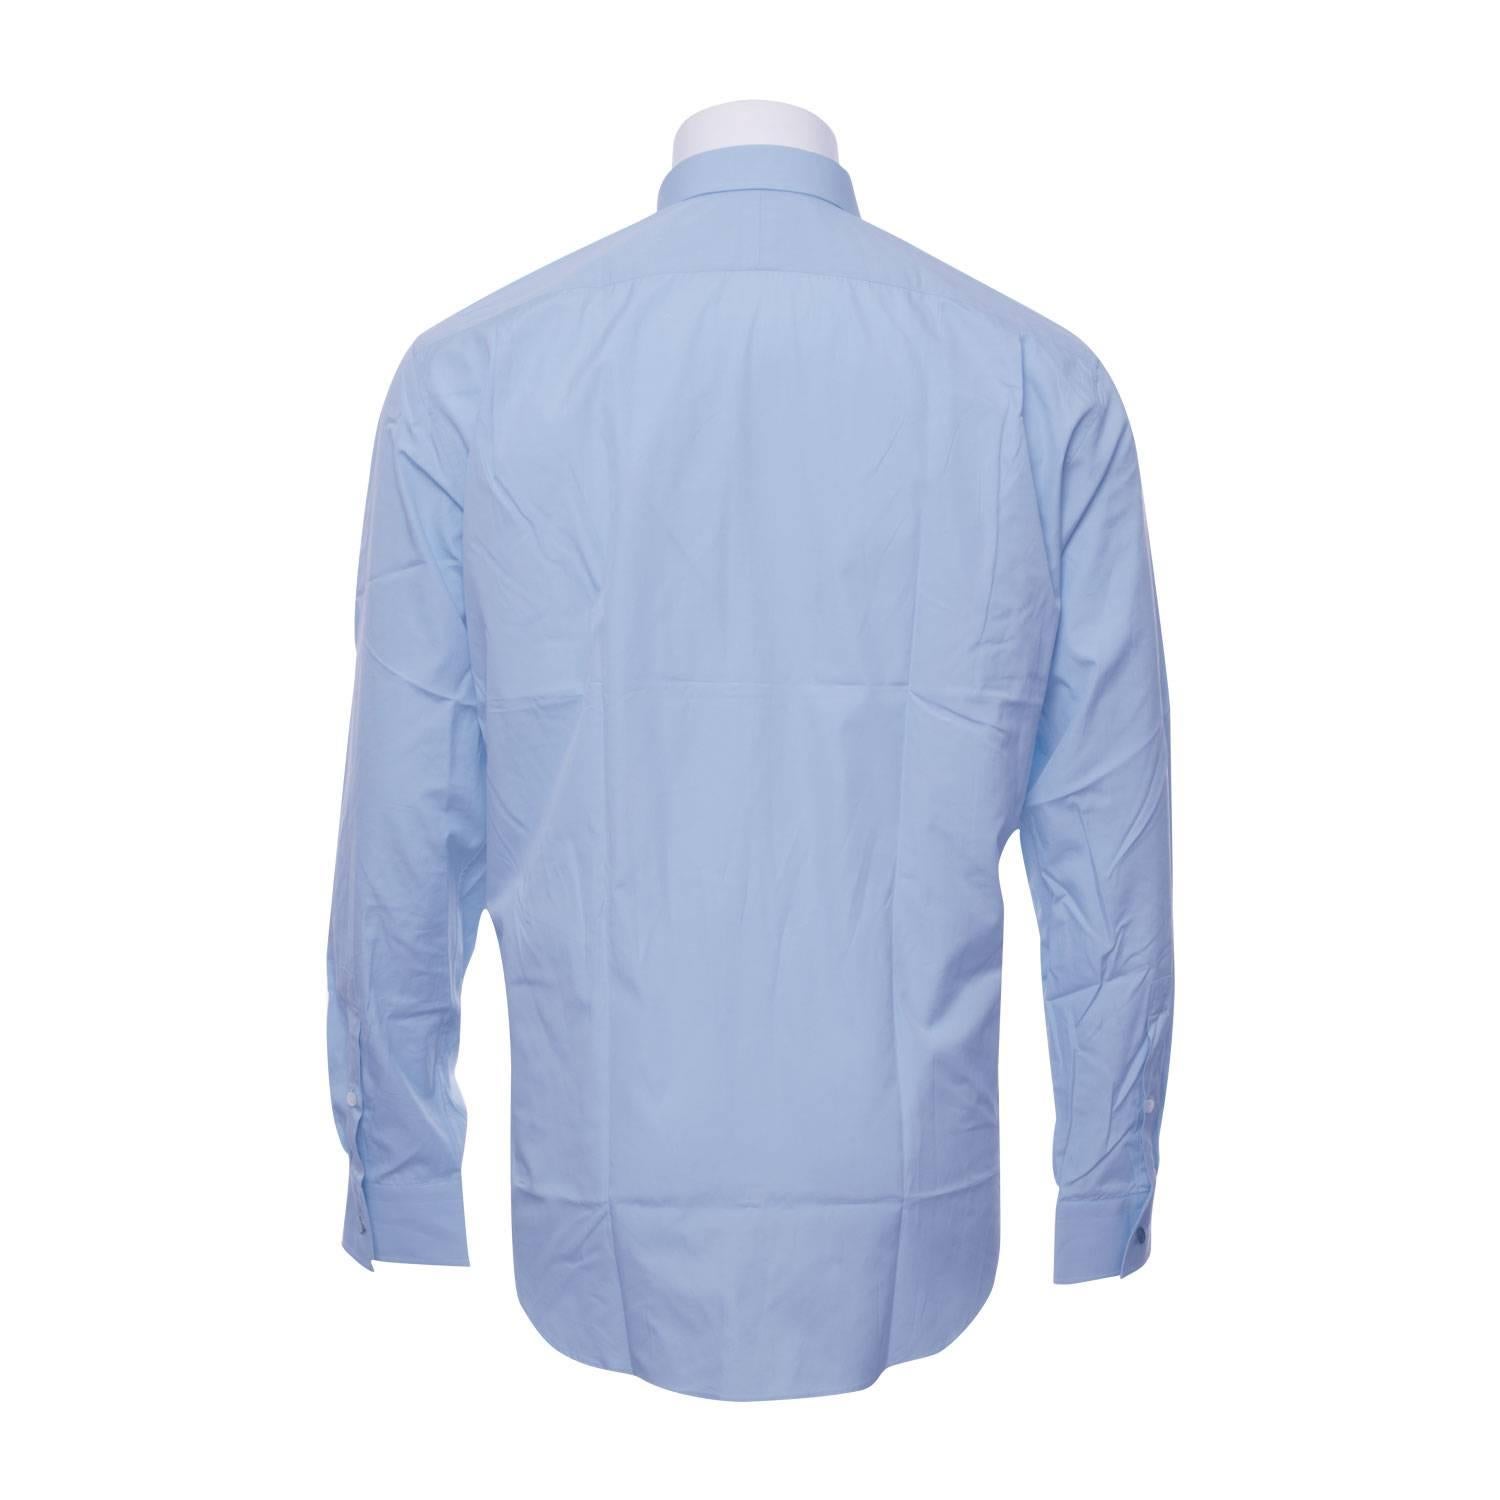 Hermes Chemise Col Droit Popeline de Coton Unie Blue Pale Color 43 Size 2016.

Pre-owned and never used.

Bought it in hermes store in 2016.

Size; 43.

Composition: Cotton.

Color; Blue Pale.

Model; Col Droit Popeline de